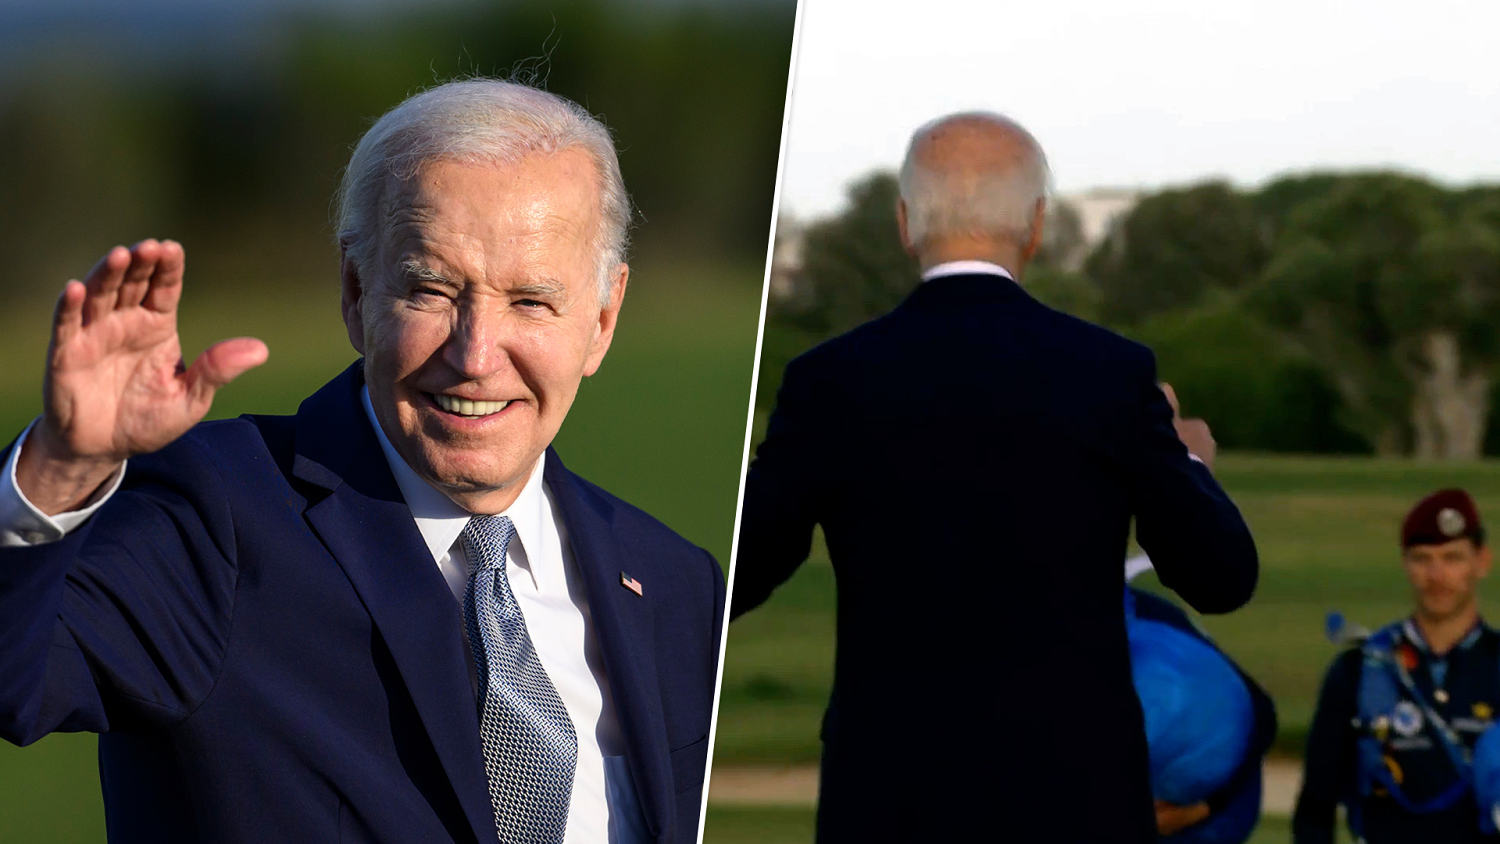 WATCH: Full video shows new angle of viral Biden G7 moment